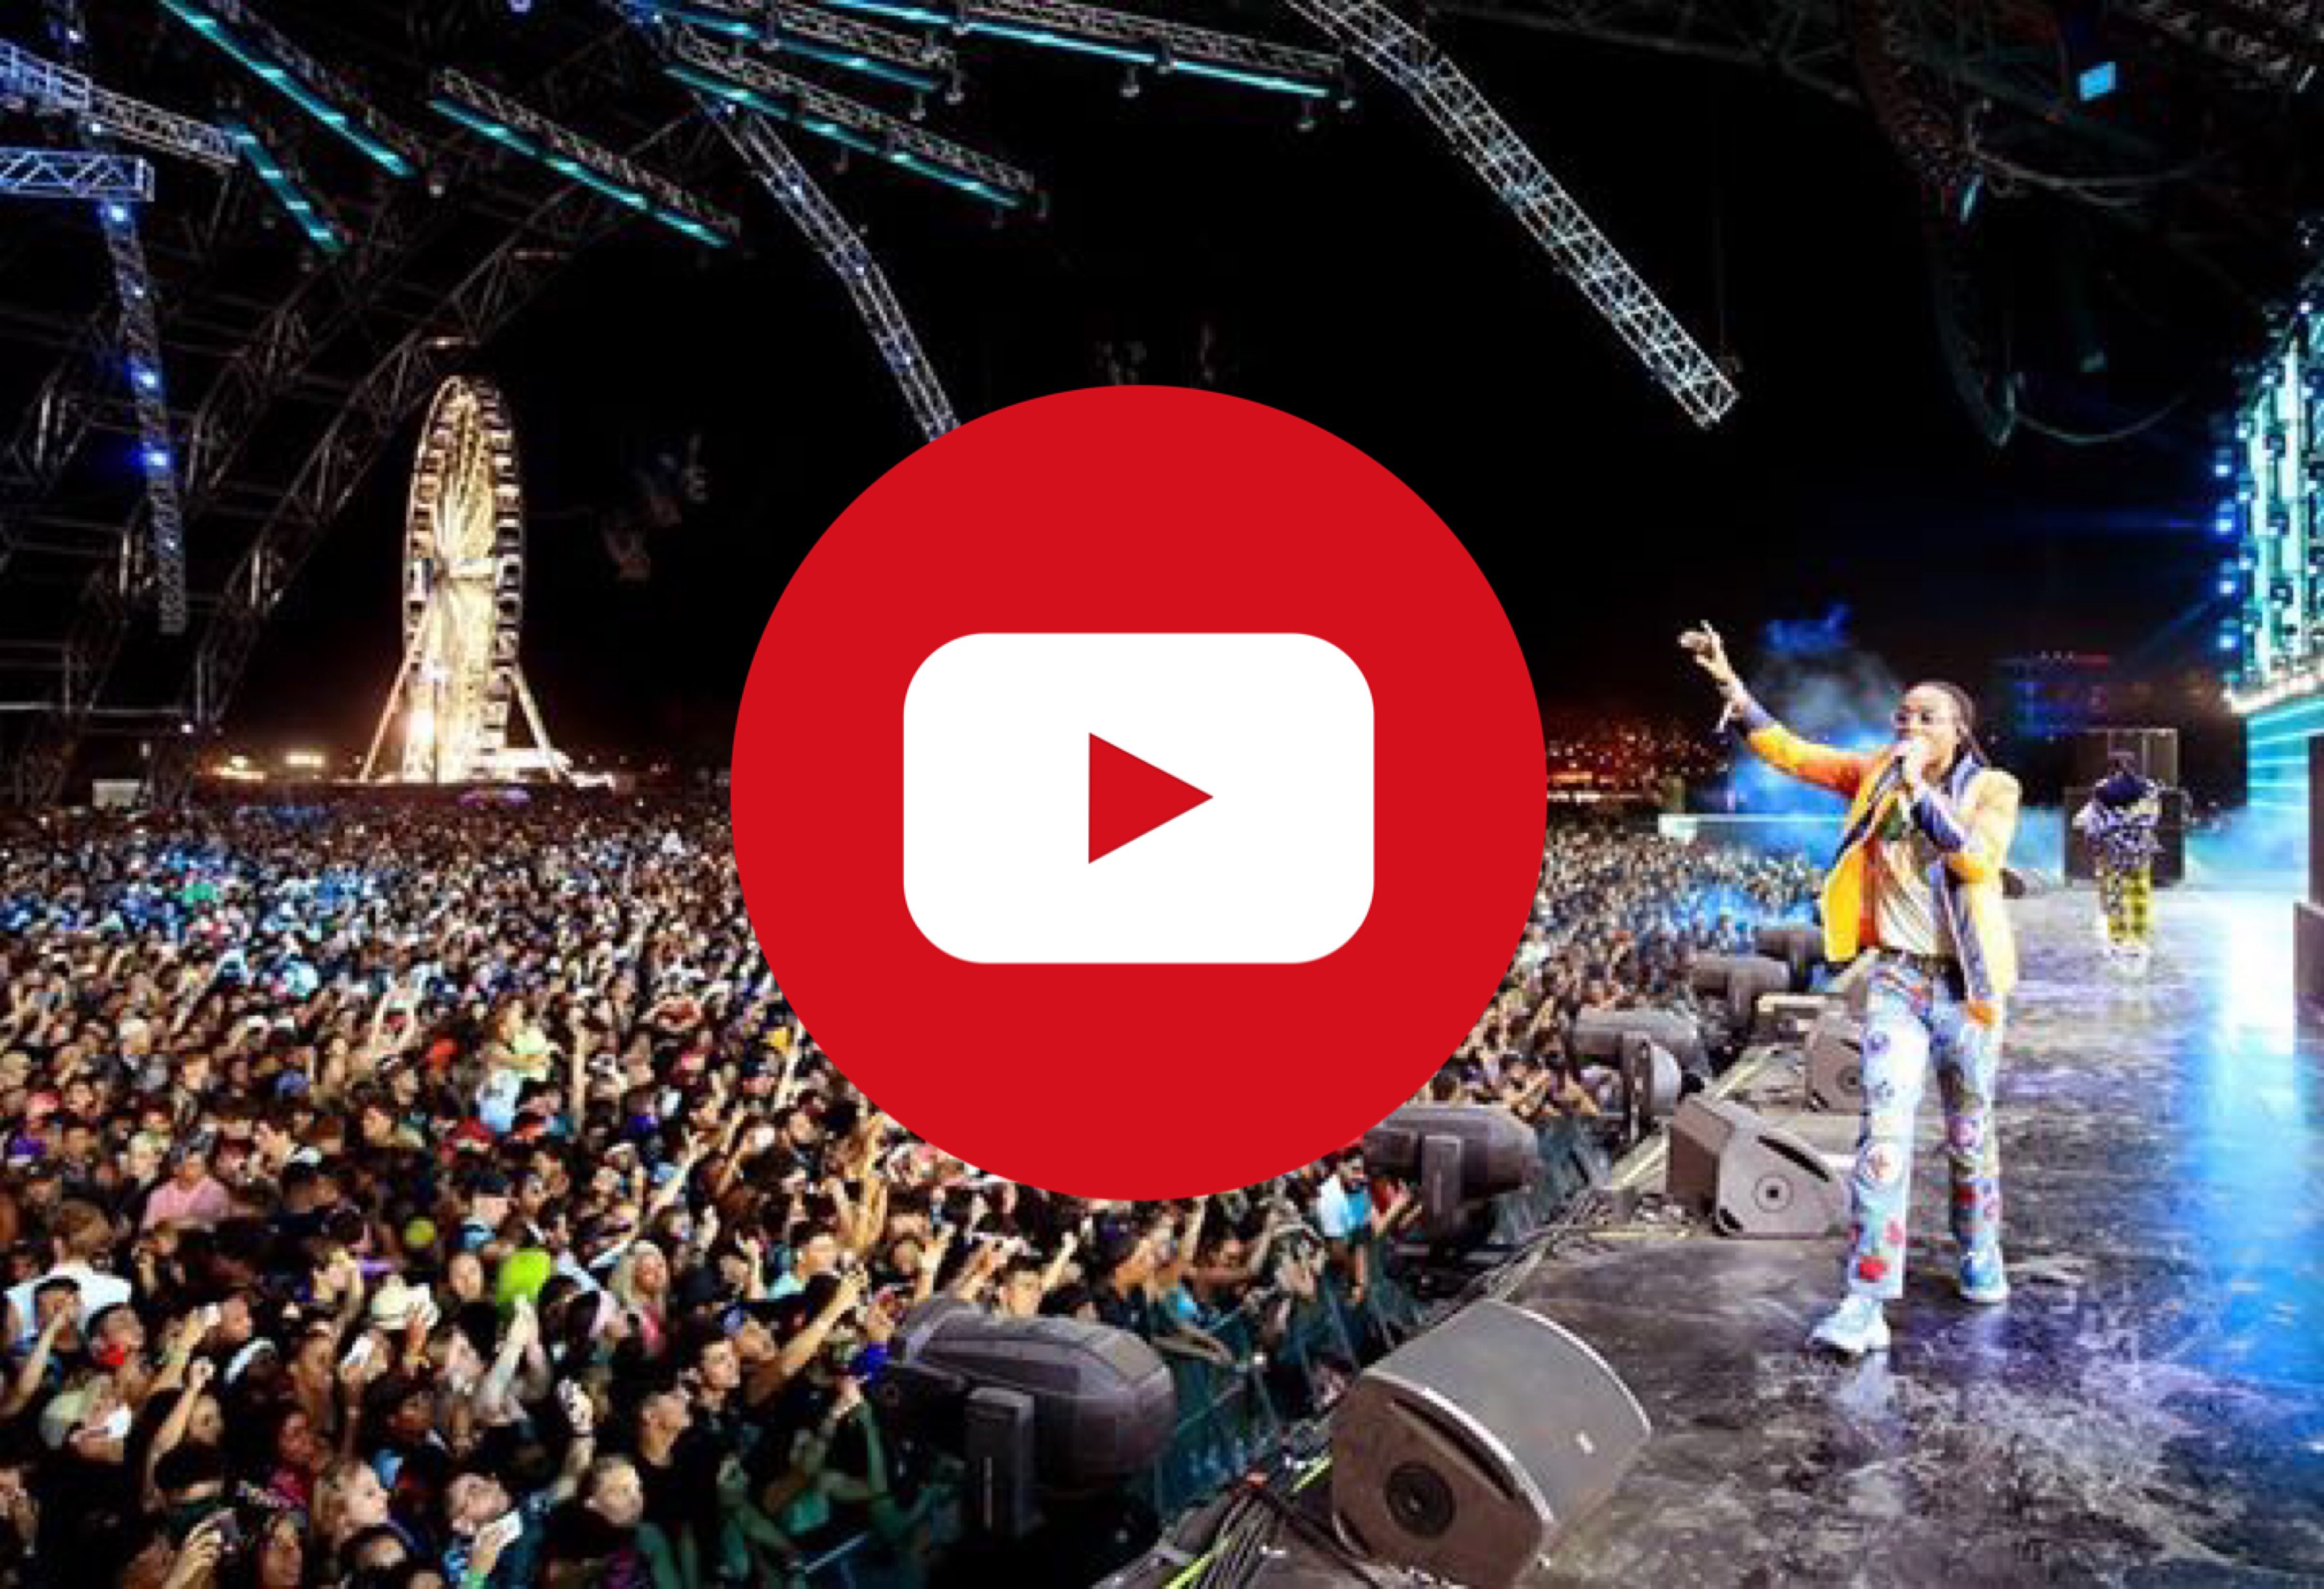 YouTube Expands Exclusive Partnership With Coachella as 2019 Line-Up is Revealed